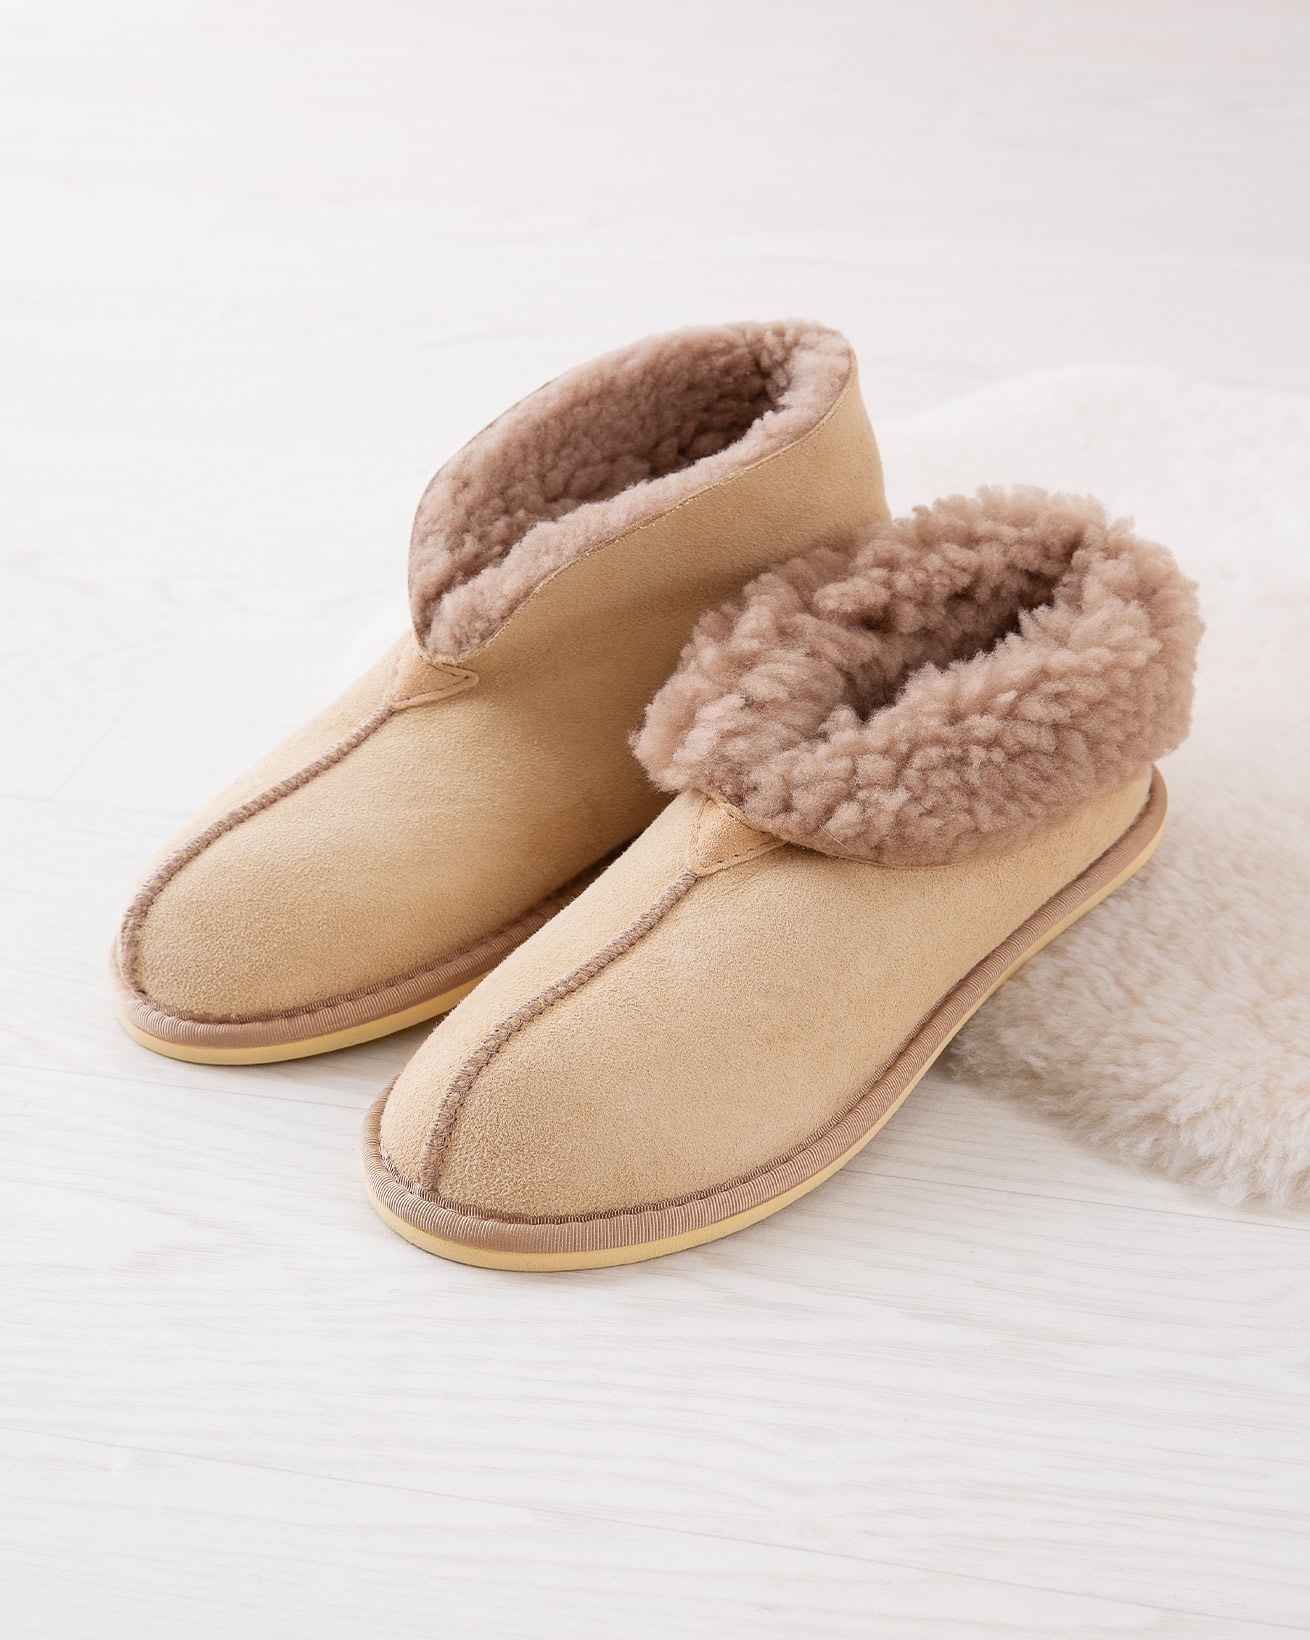 shearling bootie slippers